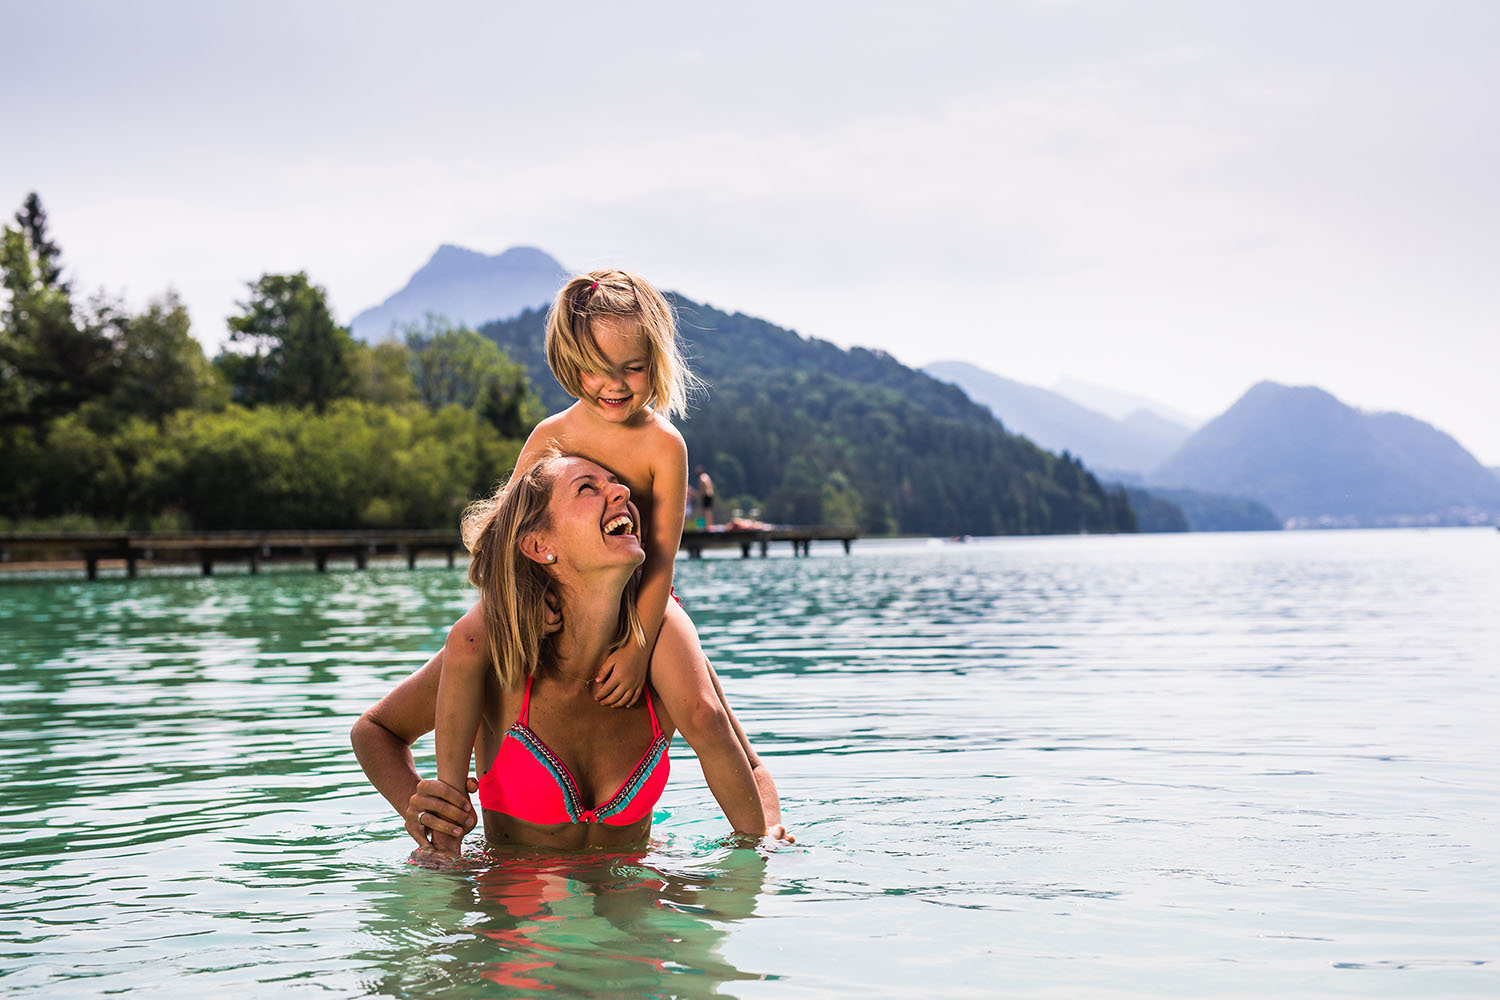 Swimming lakes in Salzburger Land offer welcome refreshment in summer